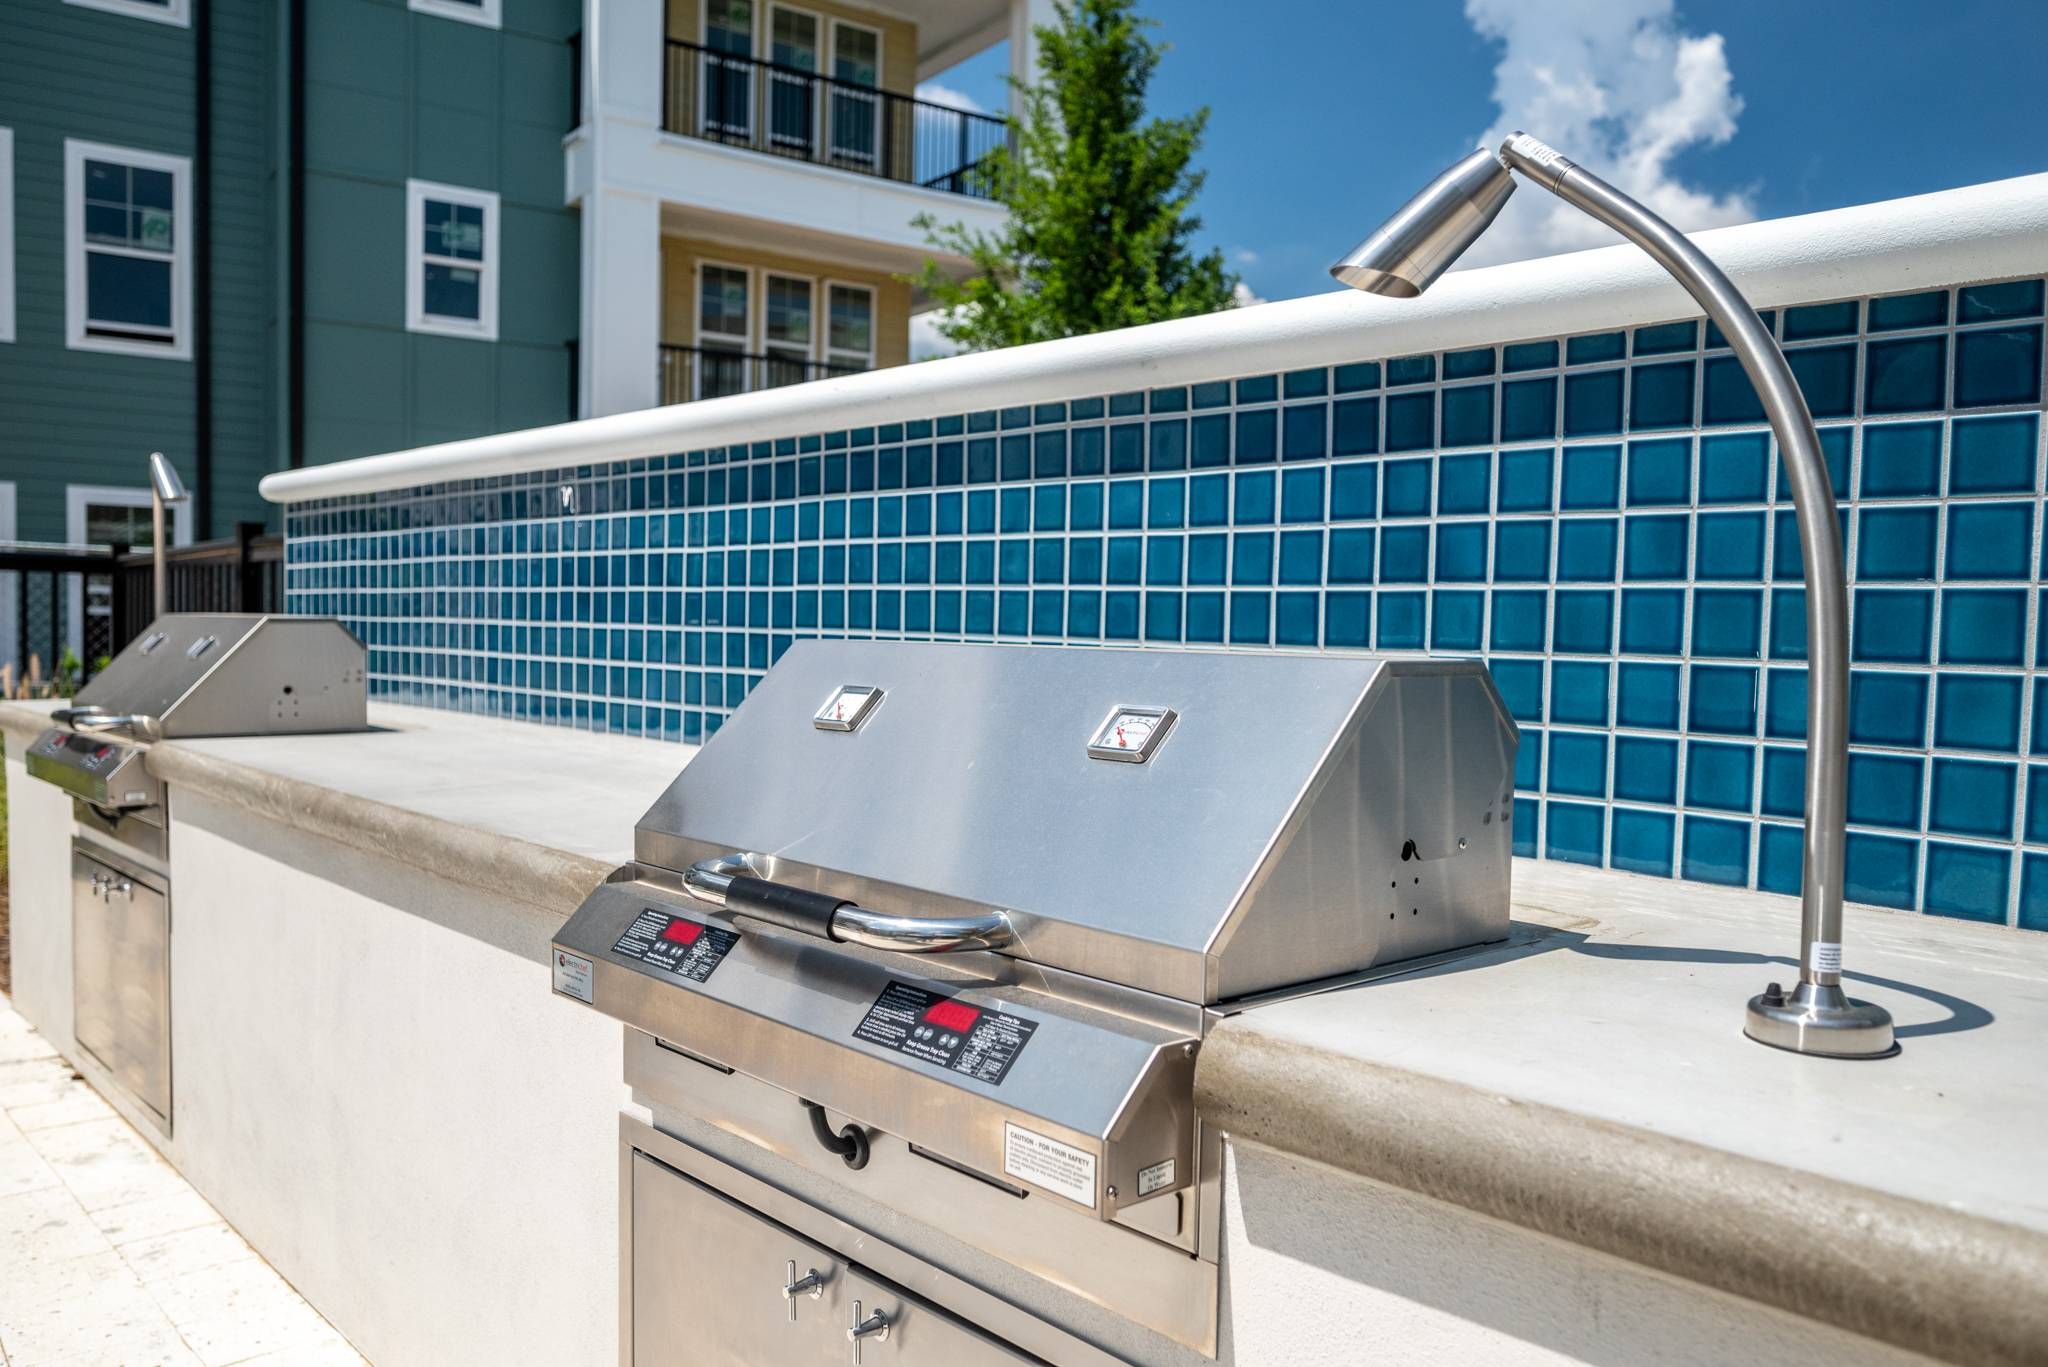 A modern outdoor grilling station with stainless steel appliances and blue tile backsplash set for resident cookouts at Alta at Horizon West.